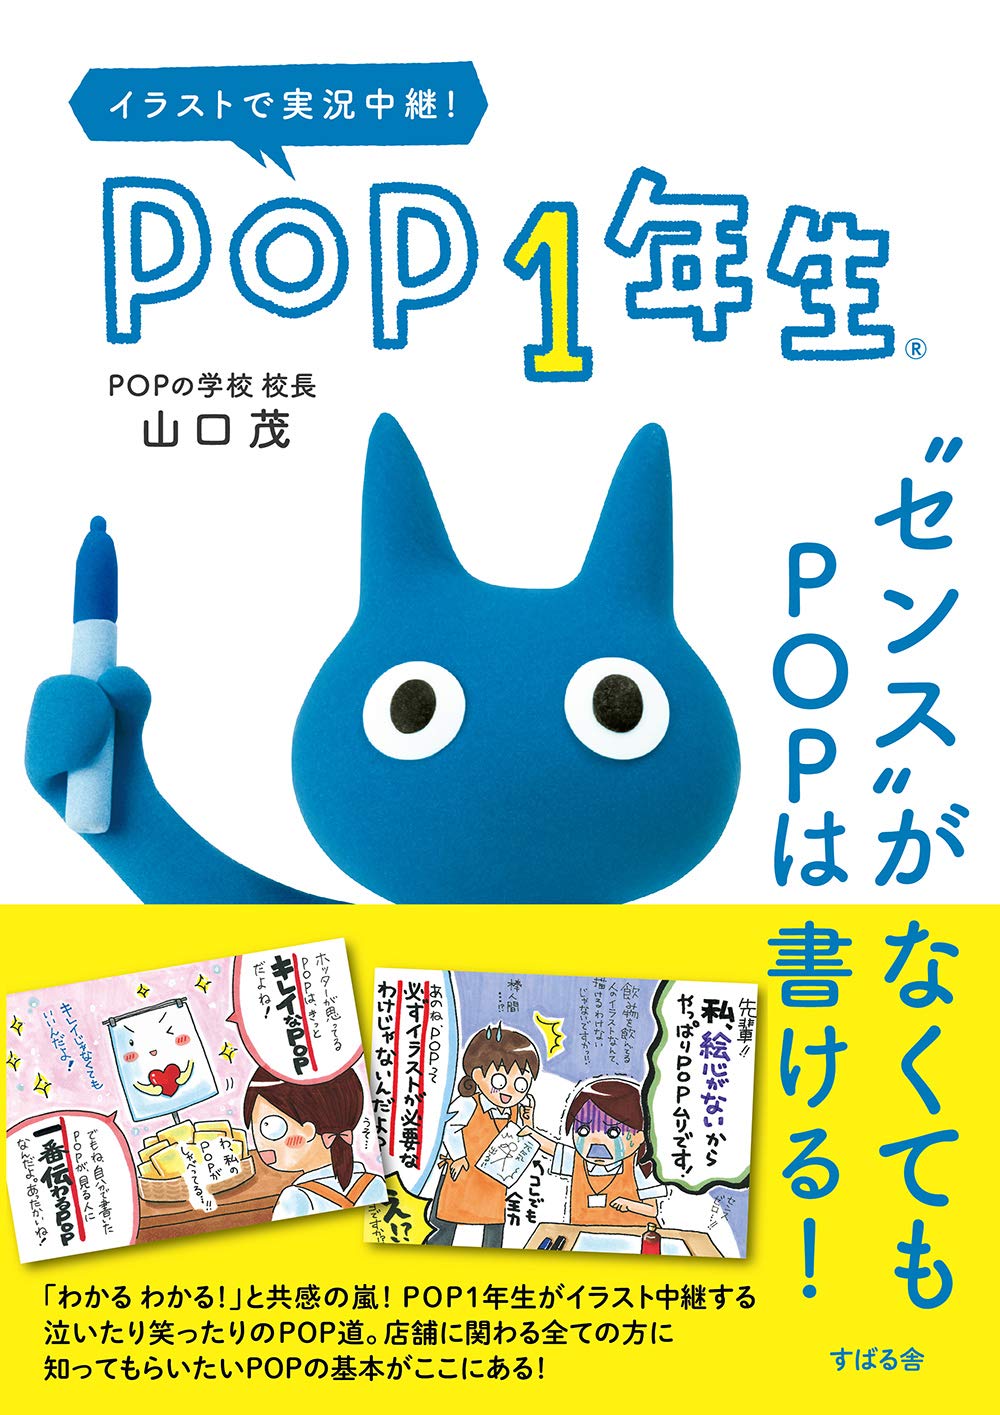 Example of a book on Pop, Point of Purchase In-Store Advertising. - How to sell your products and services in Japan